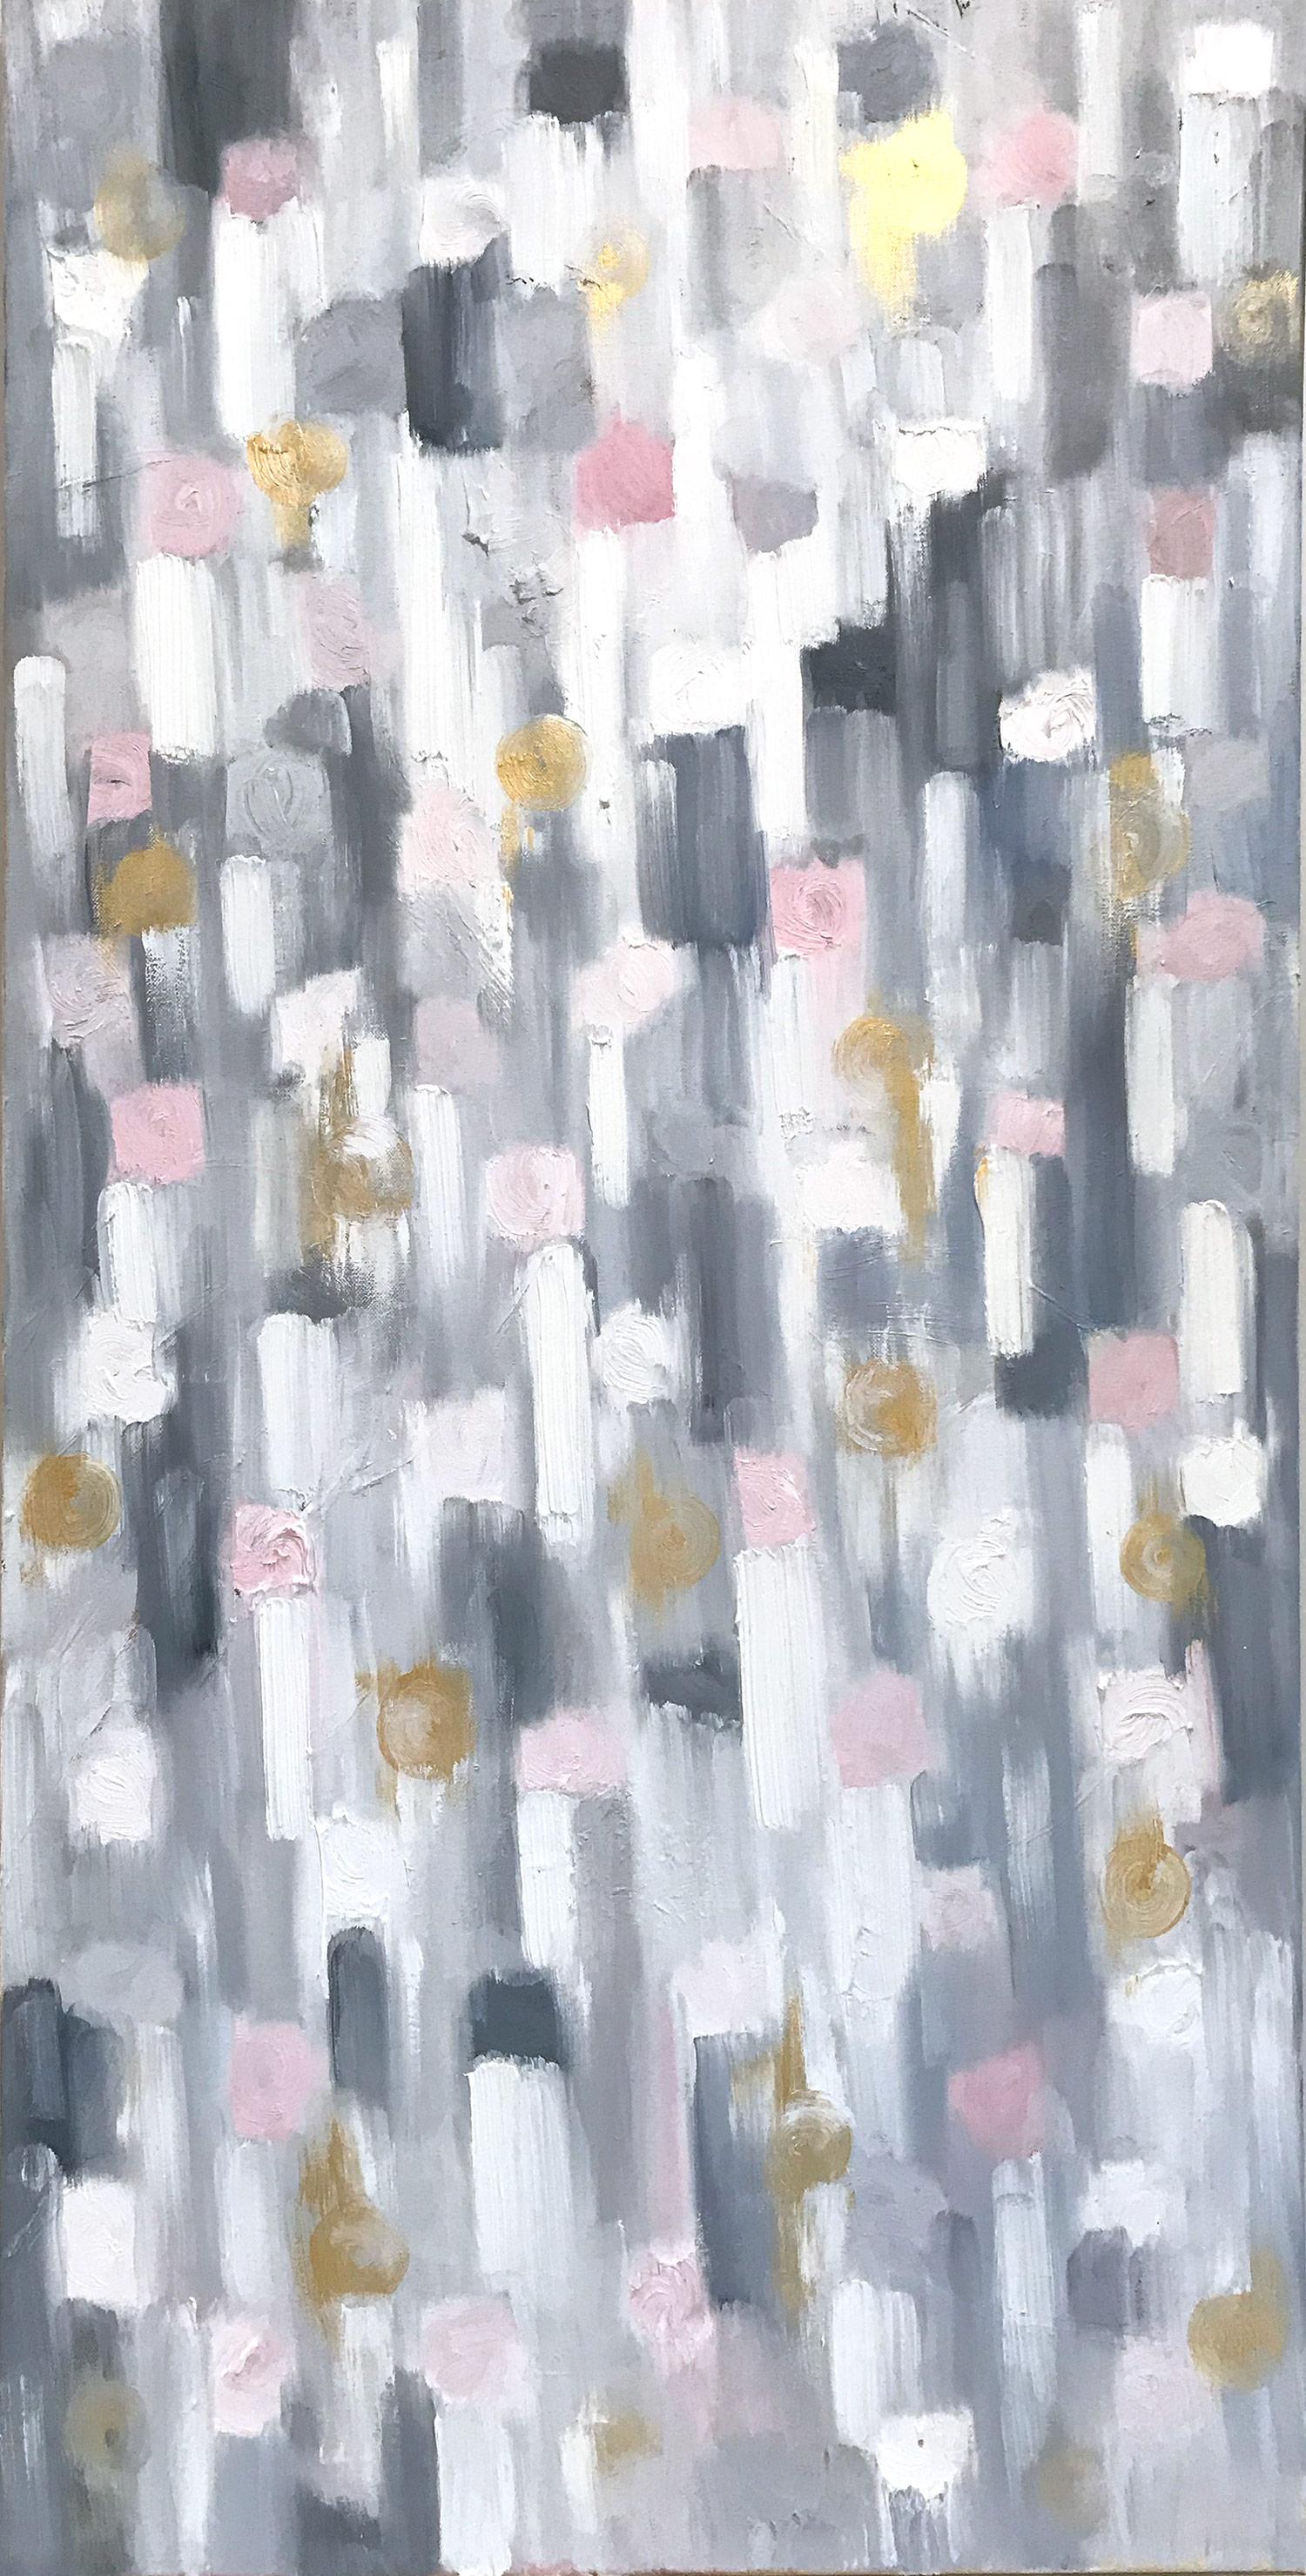 Cindy Shaoul Abstract Painting - "Dripping Dots - Golden Sun Kisses" Contemporary Abstract Oil Painting on Canvas